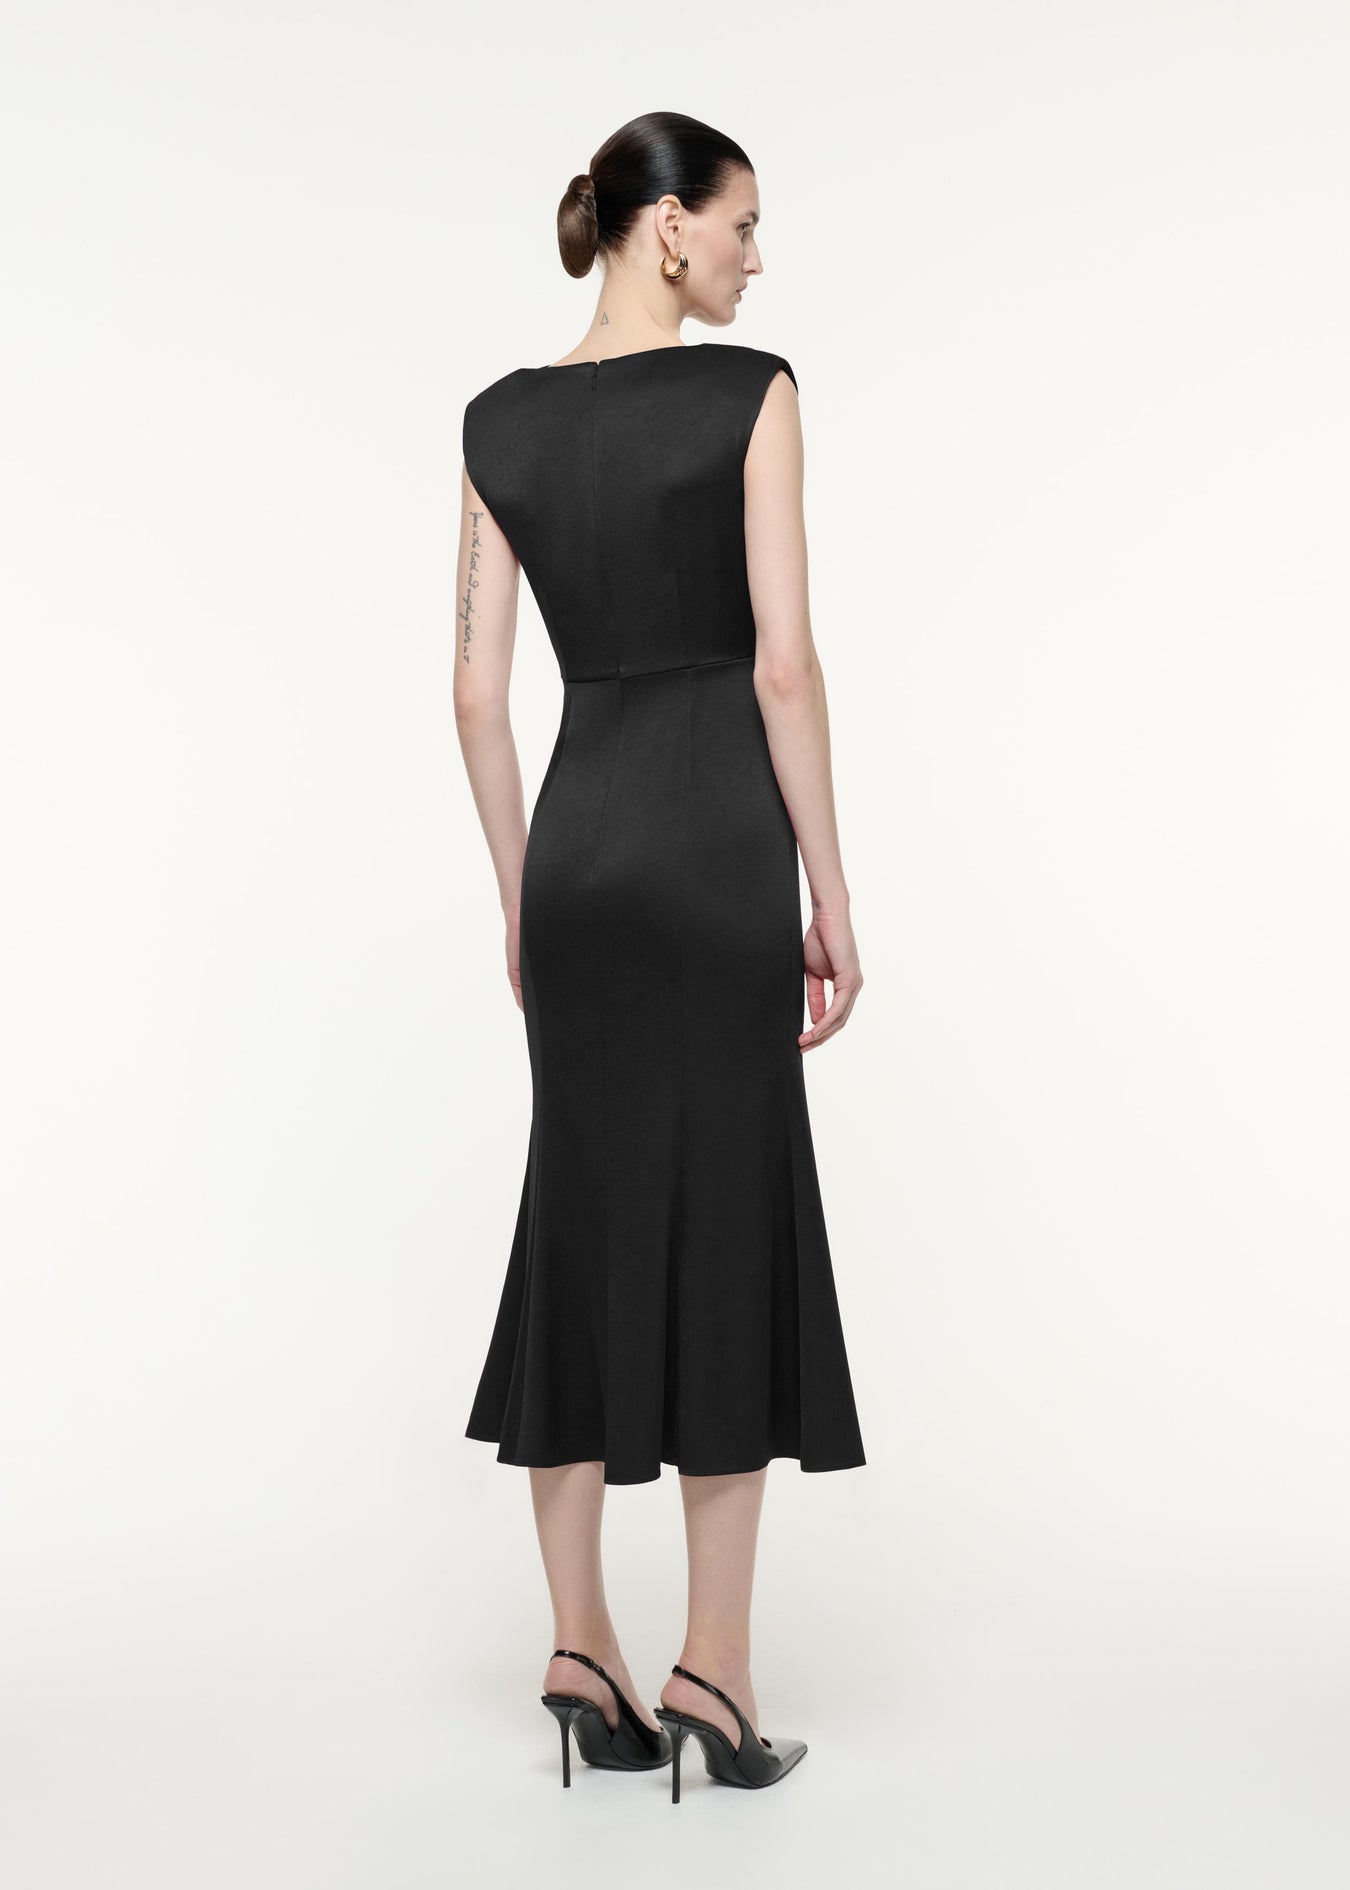 A back view image of a model wearing the Satin Crepe Midi Dress in Black